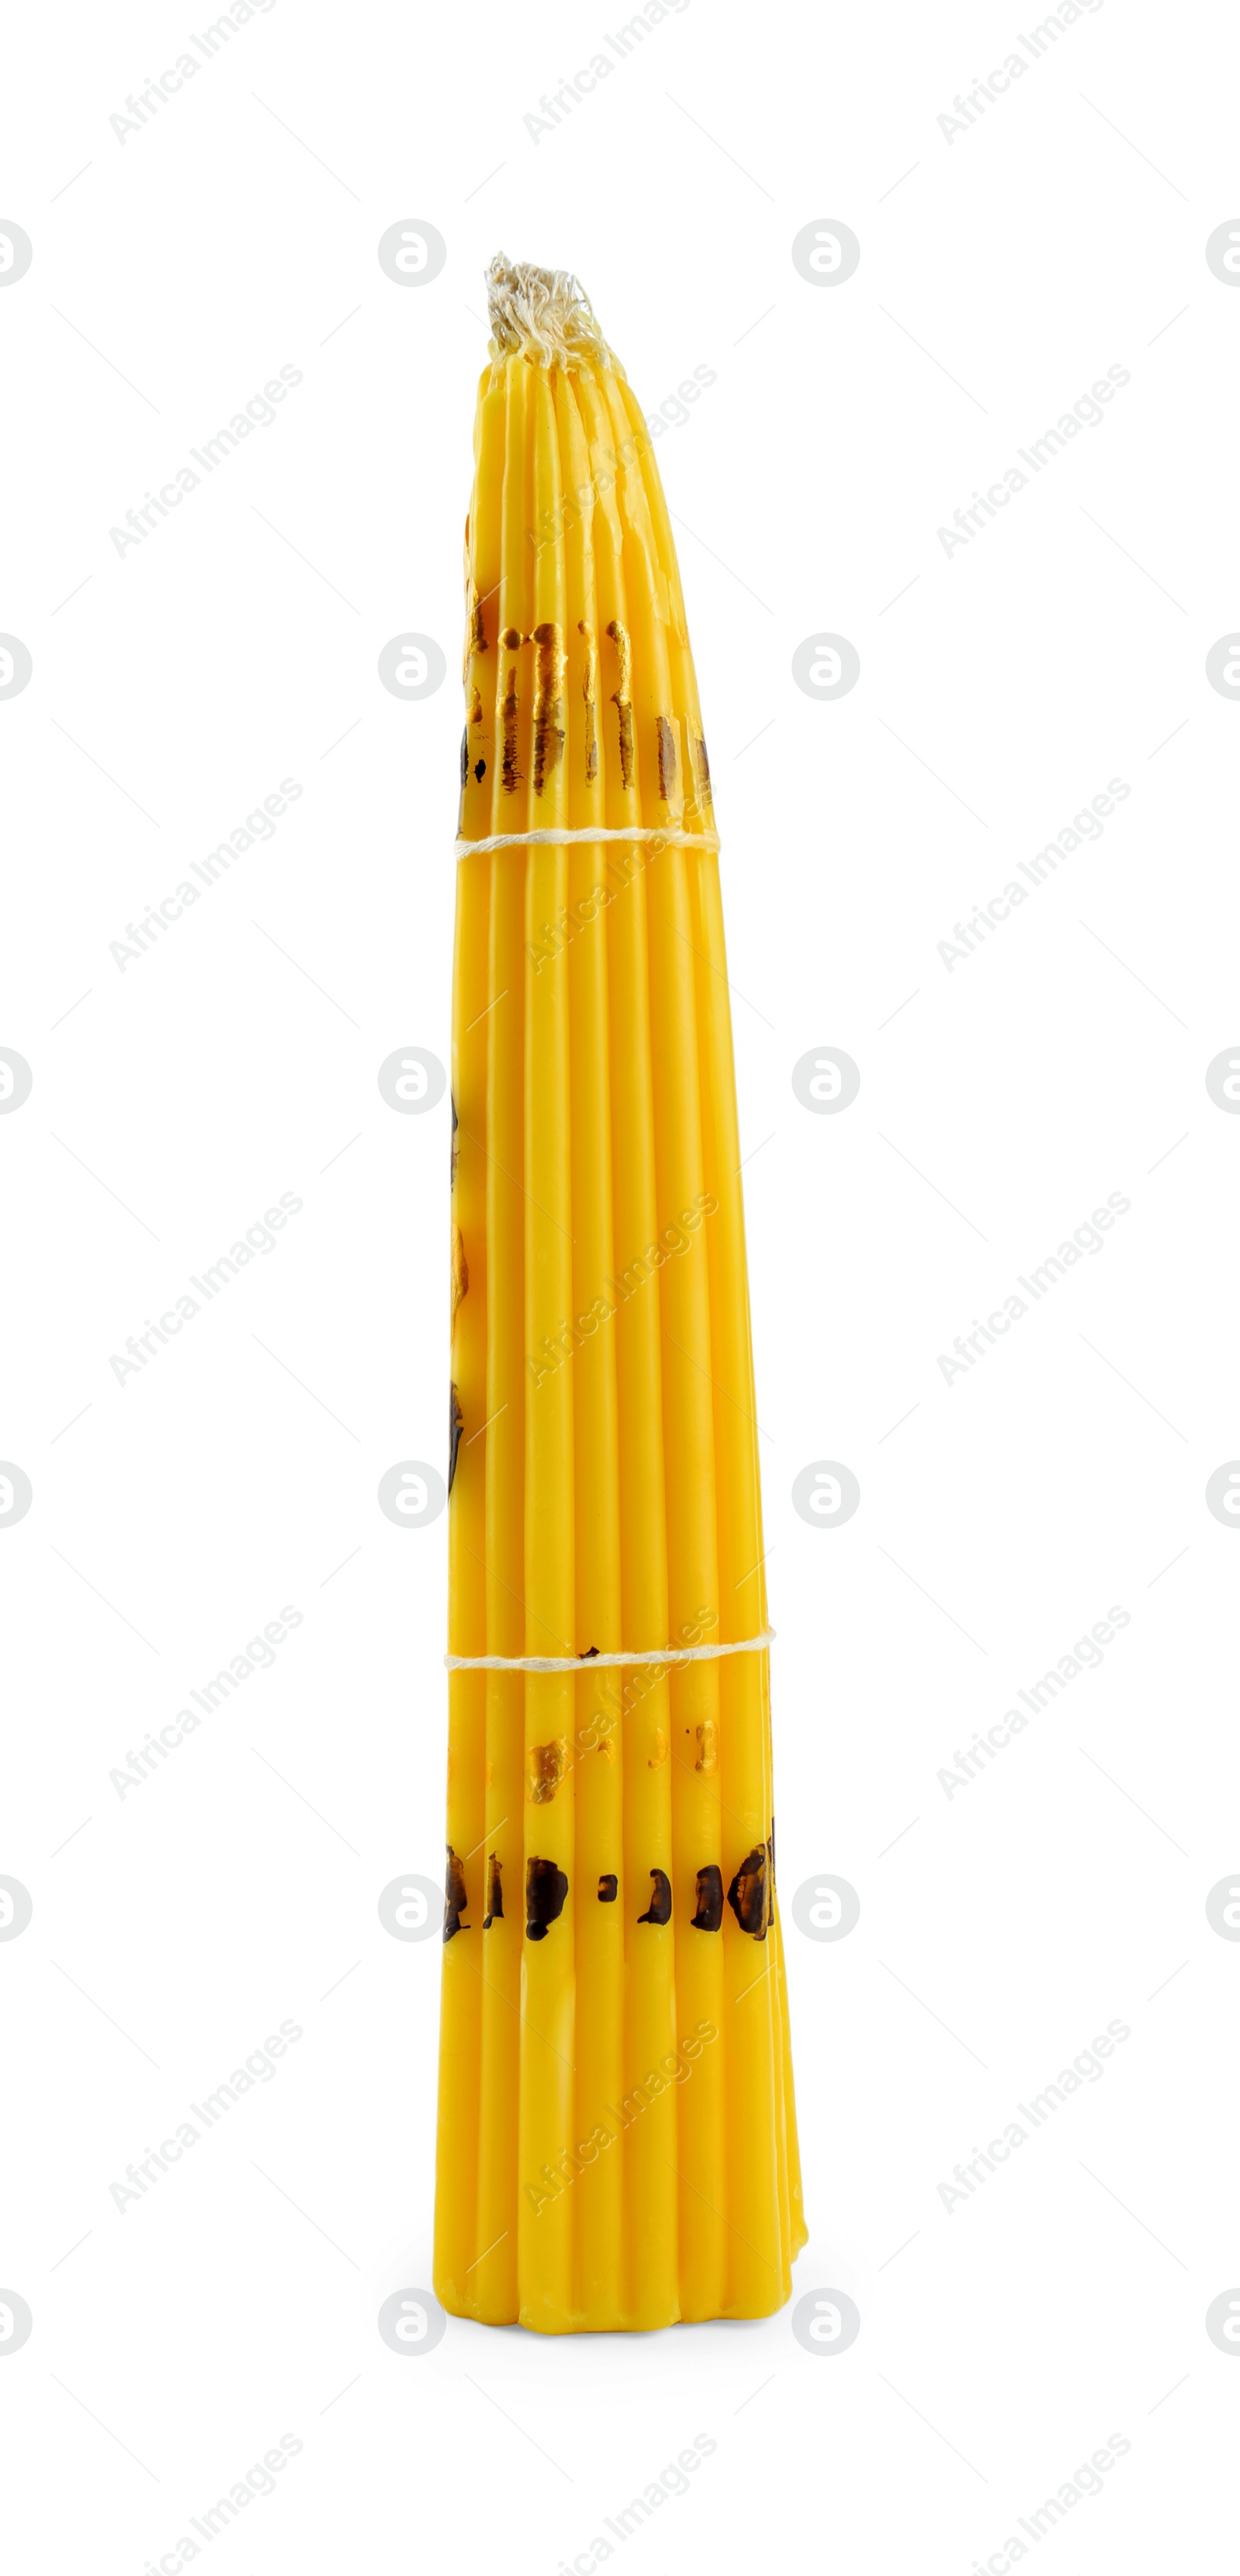 Photo of Bunch of church candles on white background